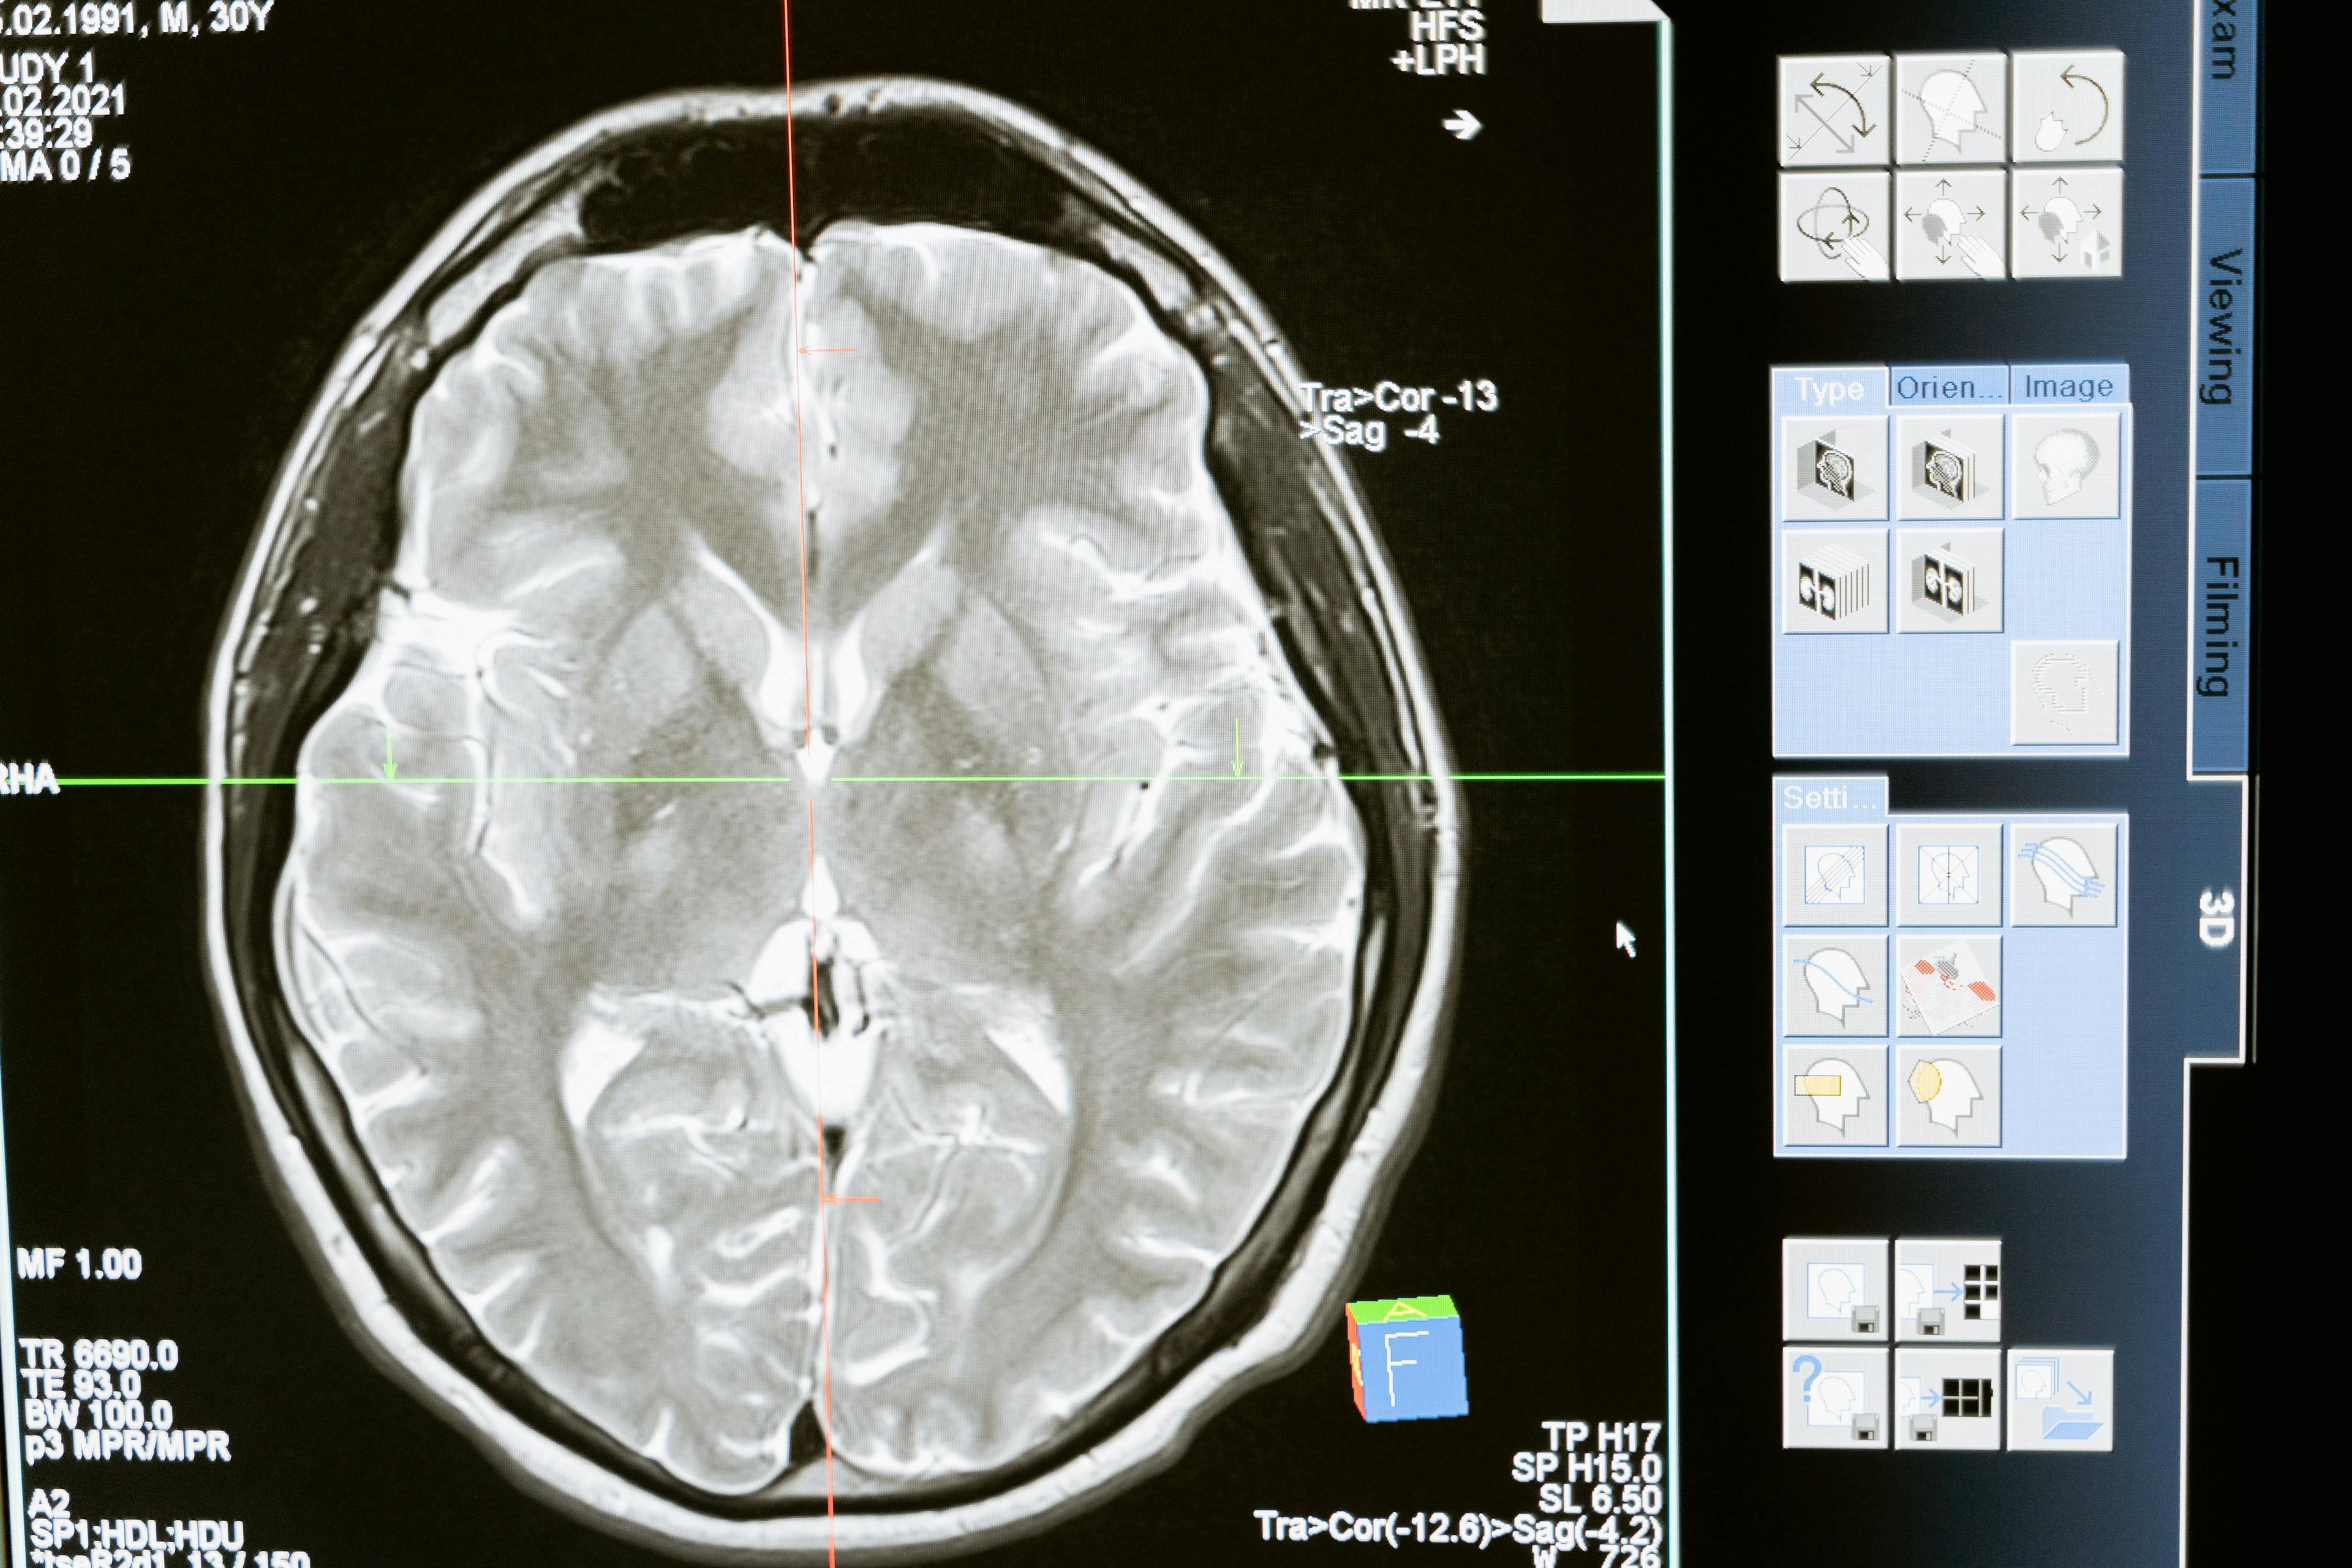 Ischemic Stroke, Other Neurological Problems: What’s COVID-19 Got to Do With It?